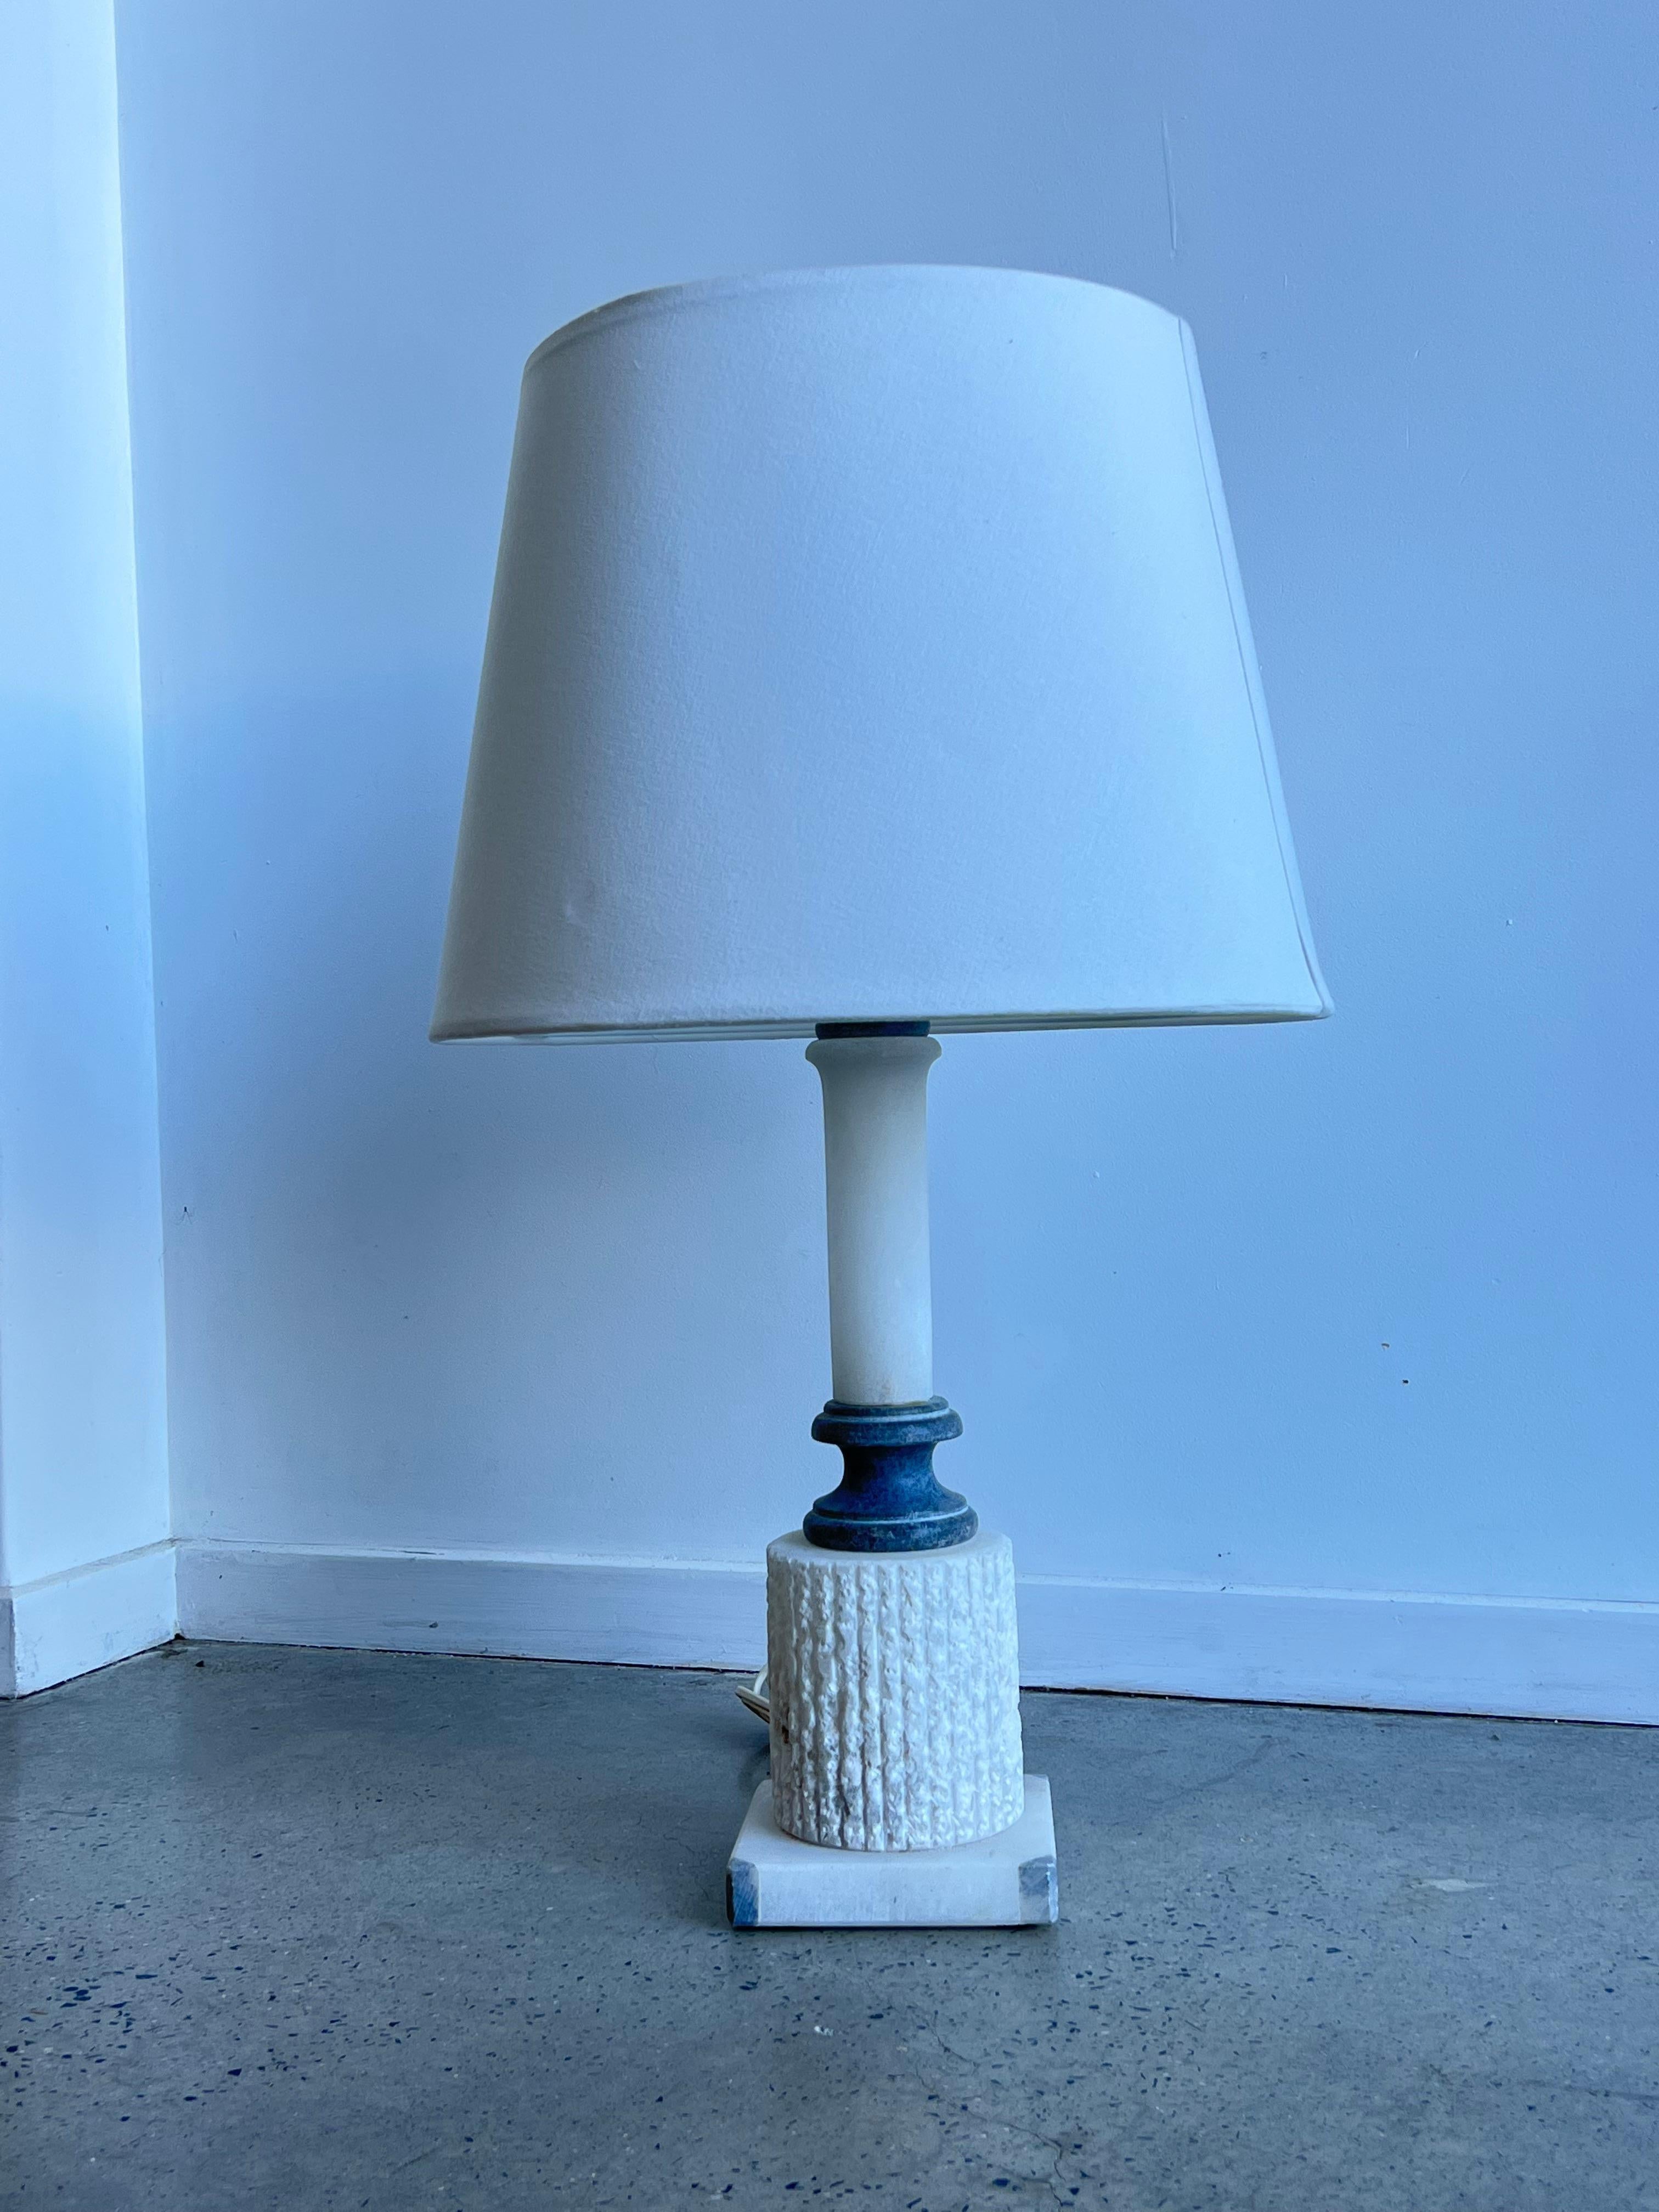 Italian white marble base table lamp 1950s.
Very stylish large table lamp or side lamp perfect for reading light.
Base it’s in different tones or marble dark and white.
We replaced the shade with a new round white cream colour shade.
 